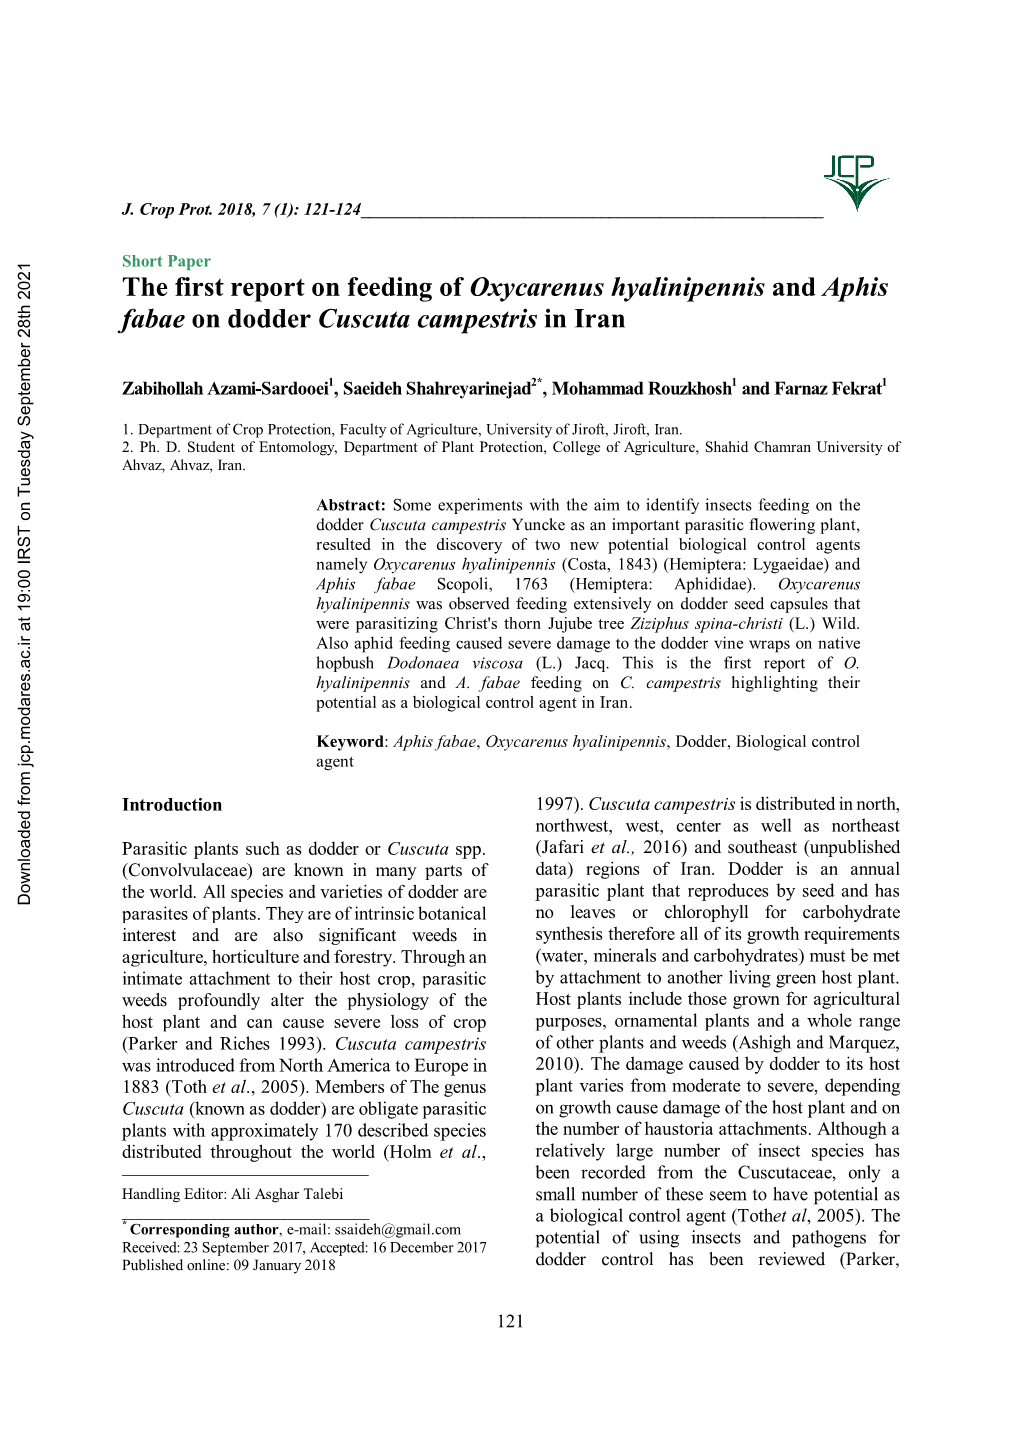 The First Report on Feeding of Oxycarenus Hyalinipennis and Aphis Fabae on Dodder Cuscuta Campestris in Iran